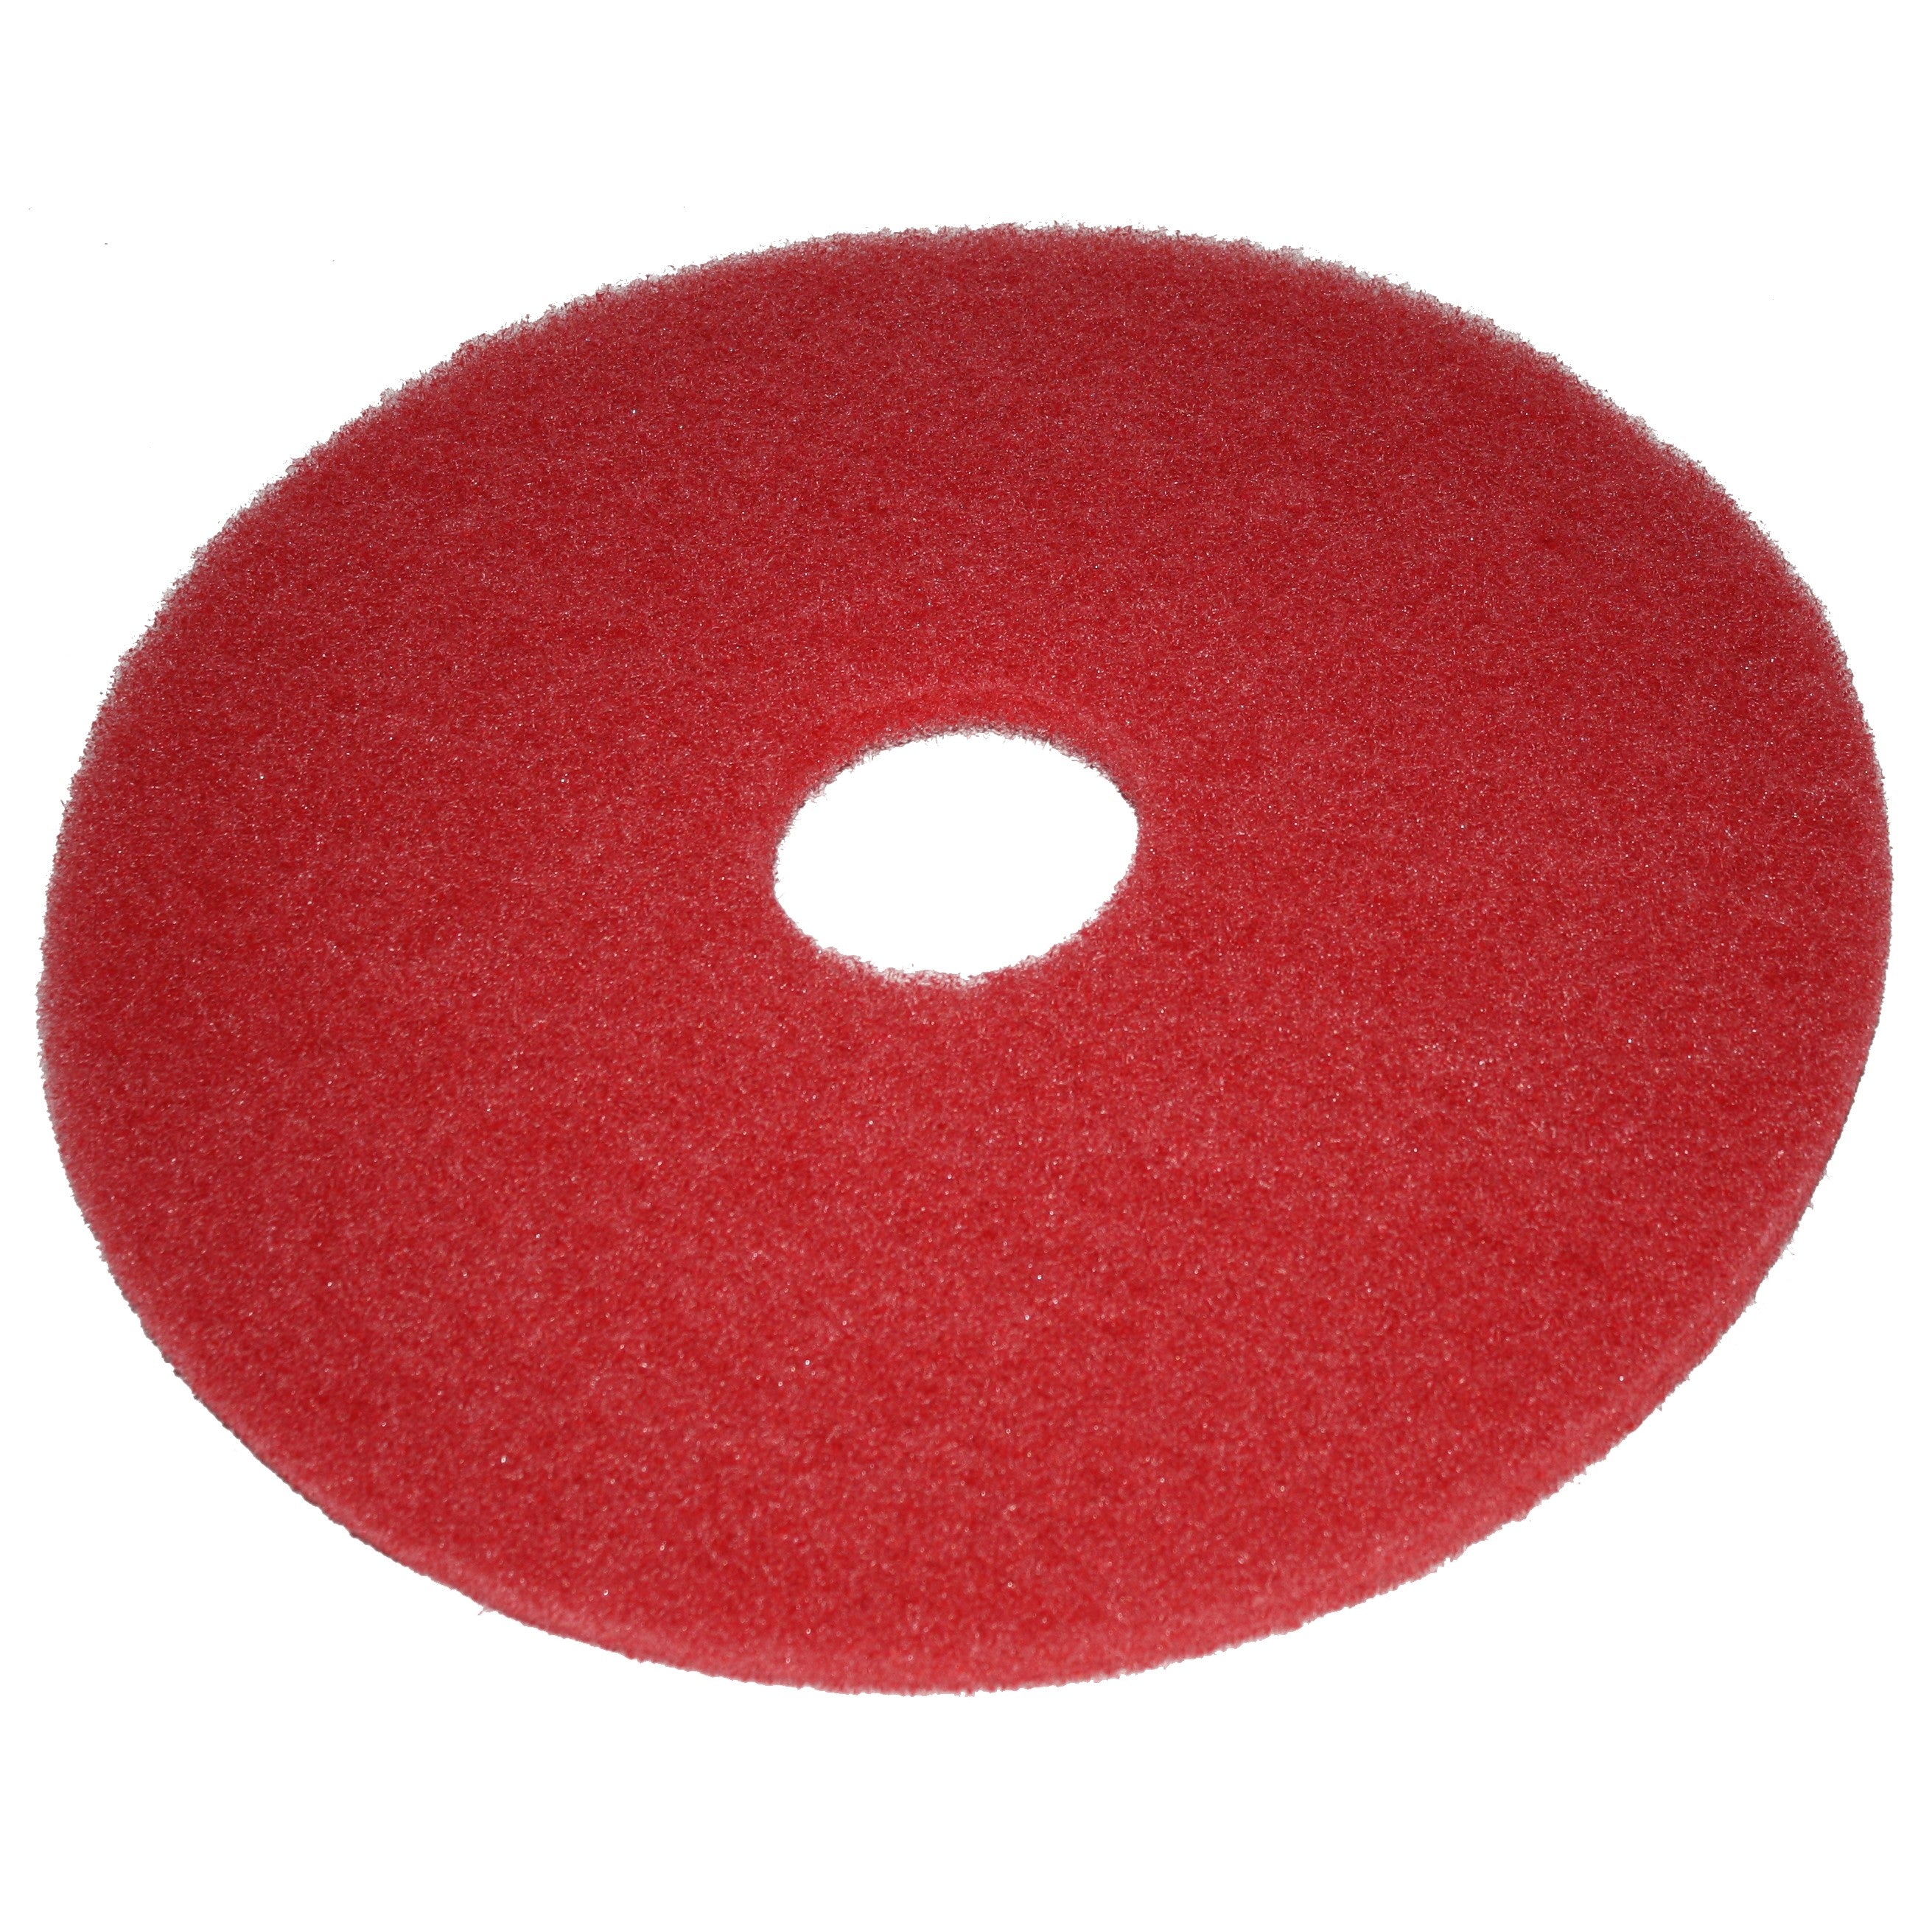 Pad rouge, Ø 152 mm, polyester